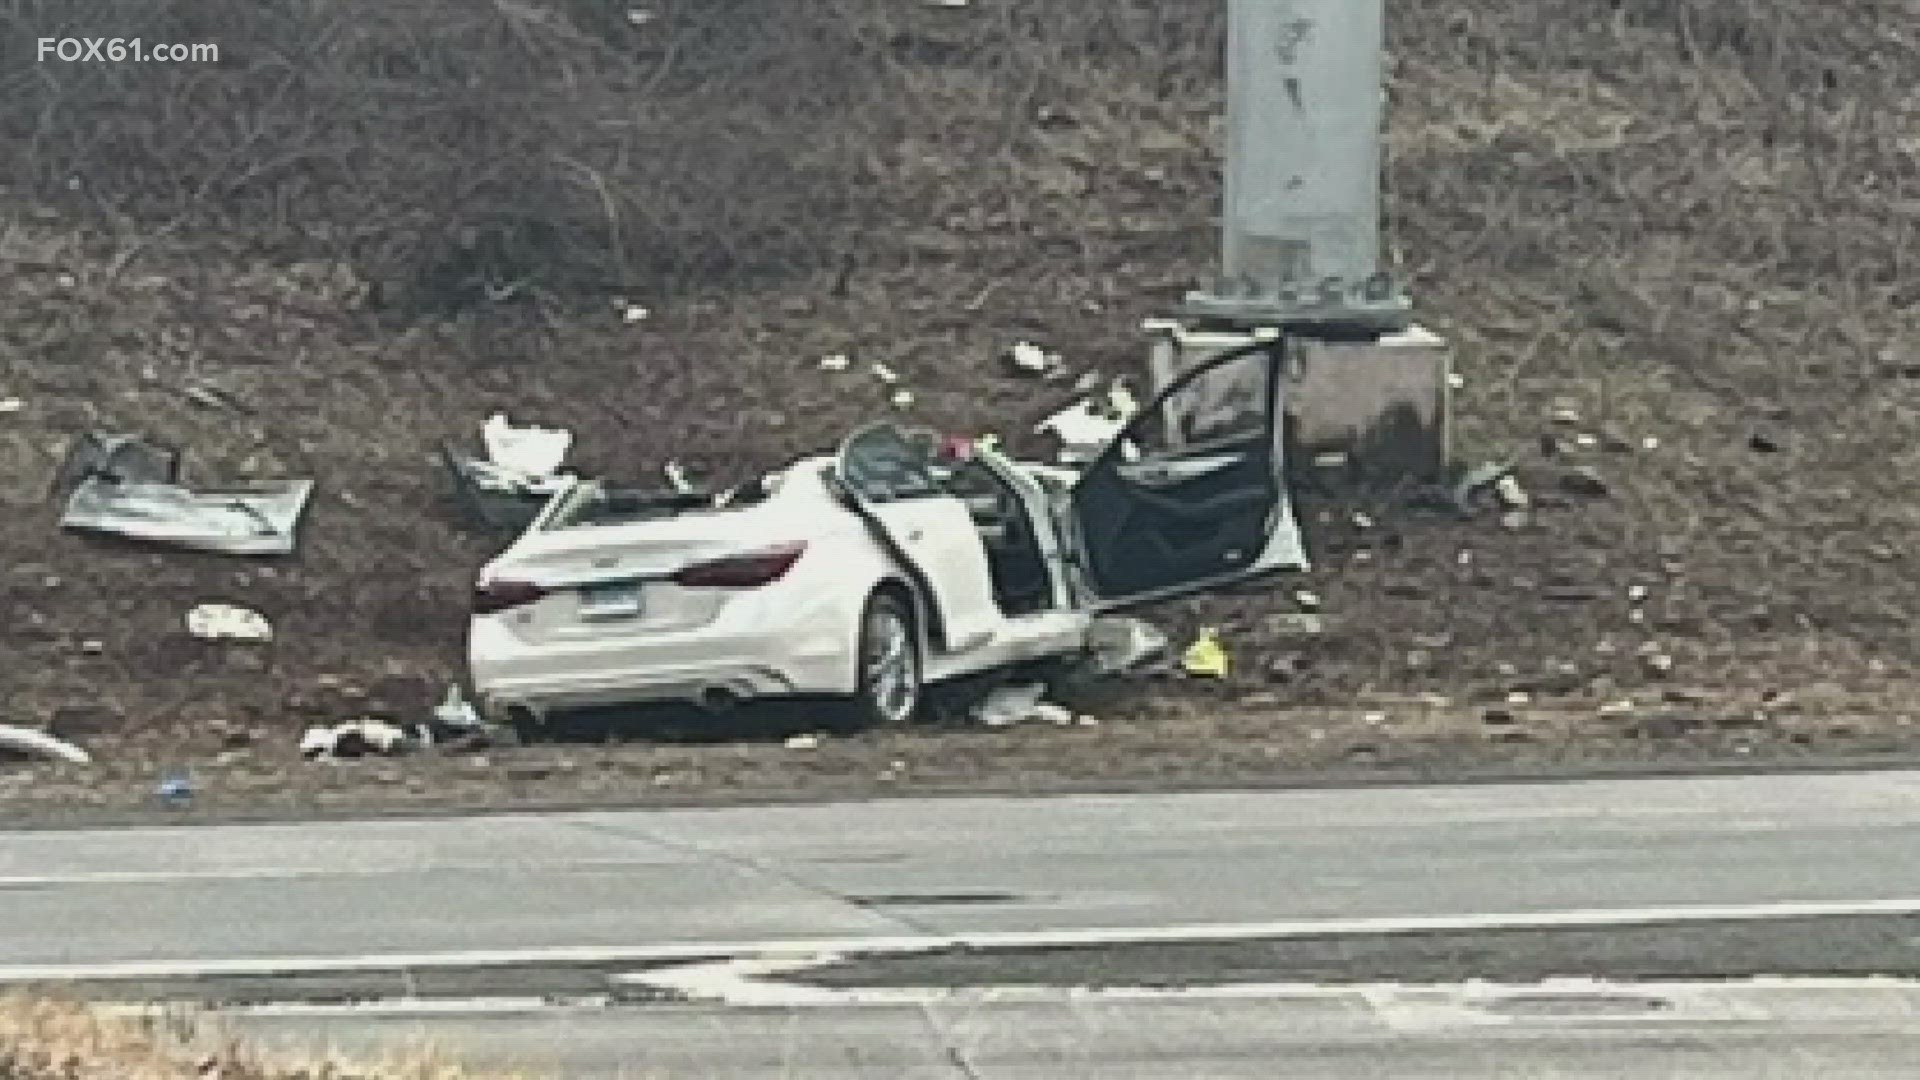 The man crashed into a concrete sign post just before the Route 9, Route 72 split.